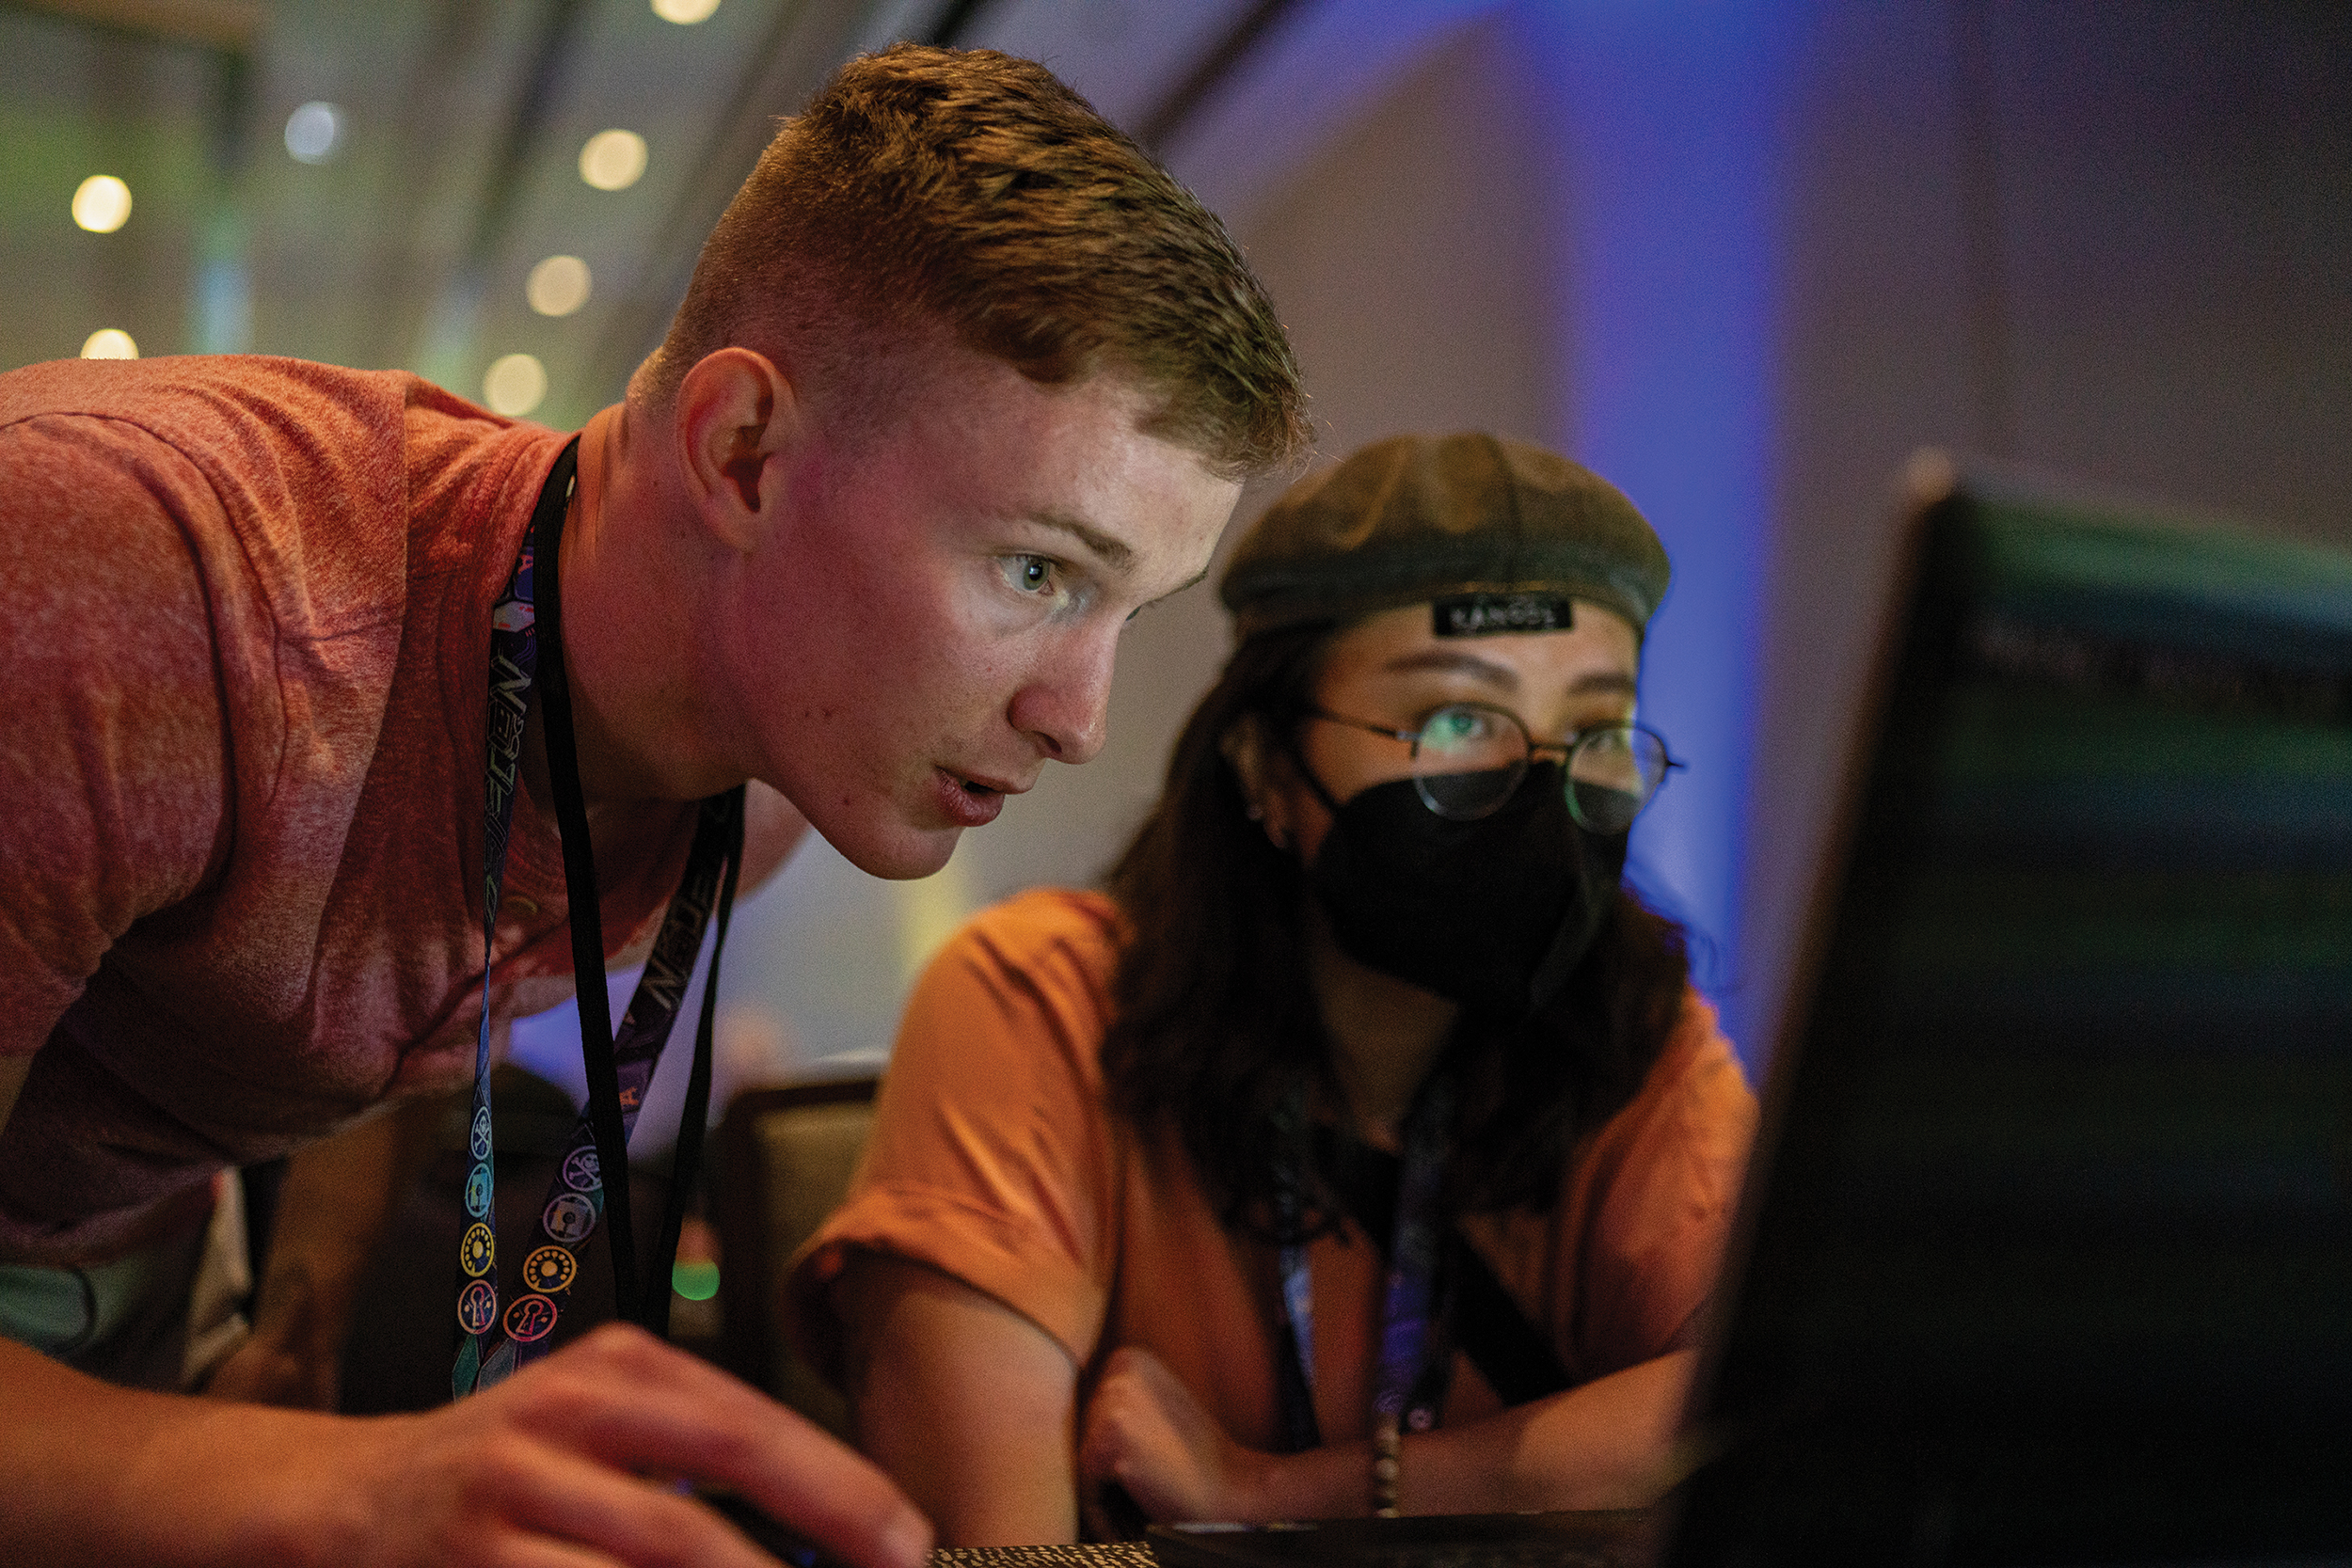 Marine Corps Corporal helps civilian with computer network analysis hacking game called Packet Inspector at DEF CON 31, Las Vegas, Nevada